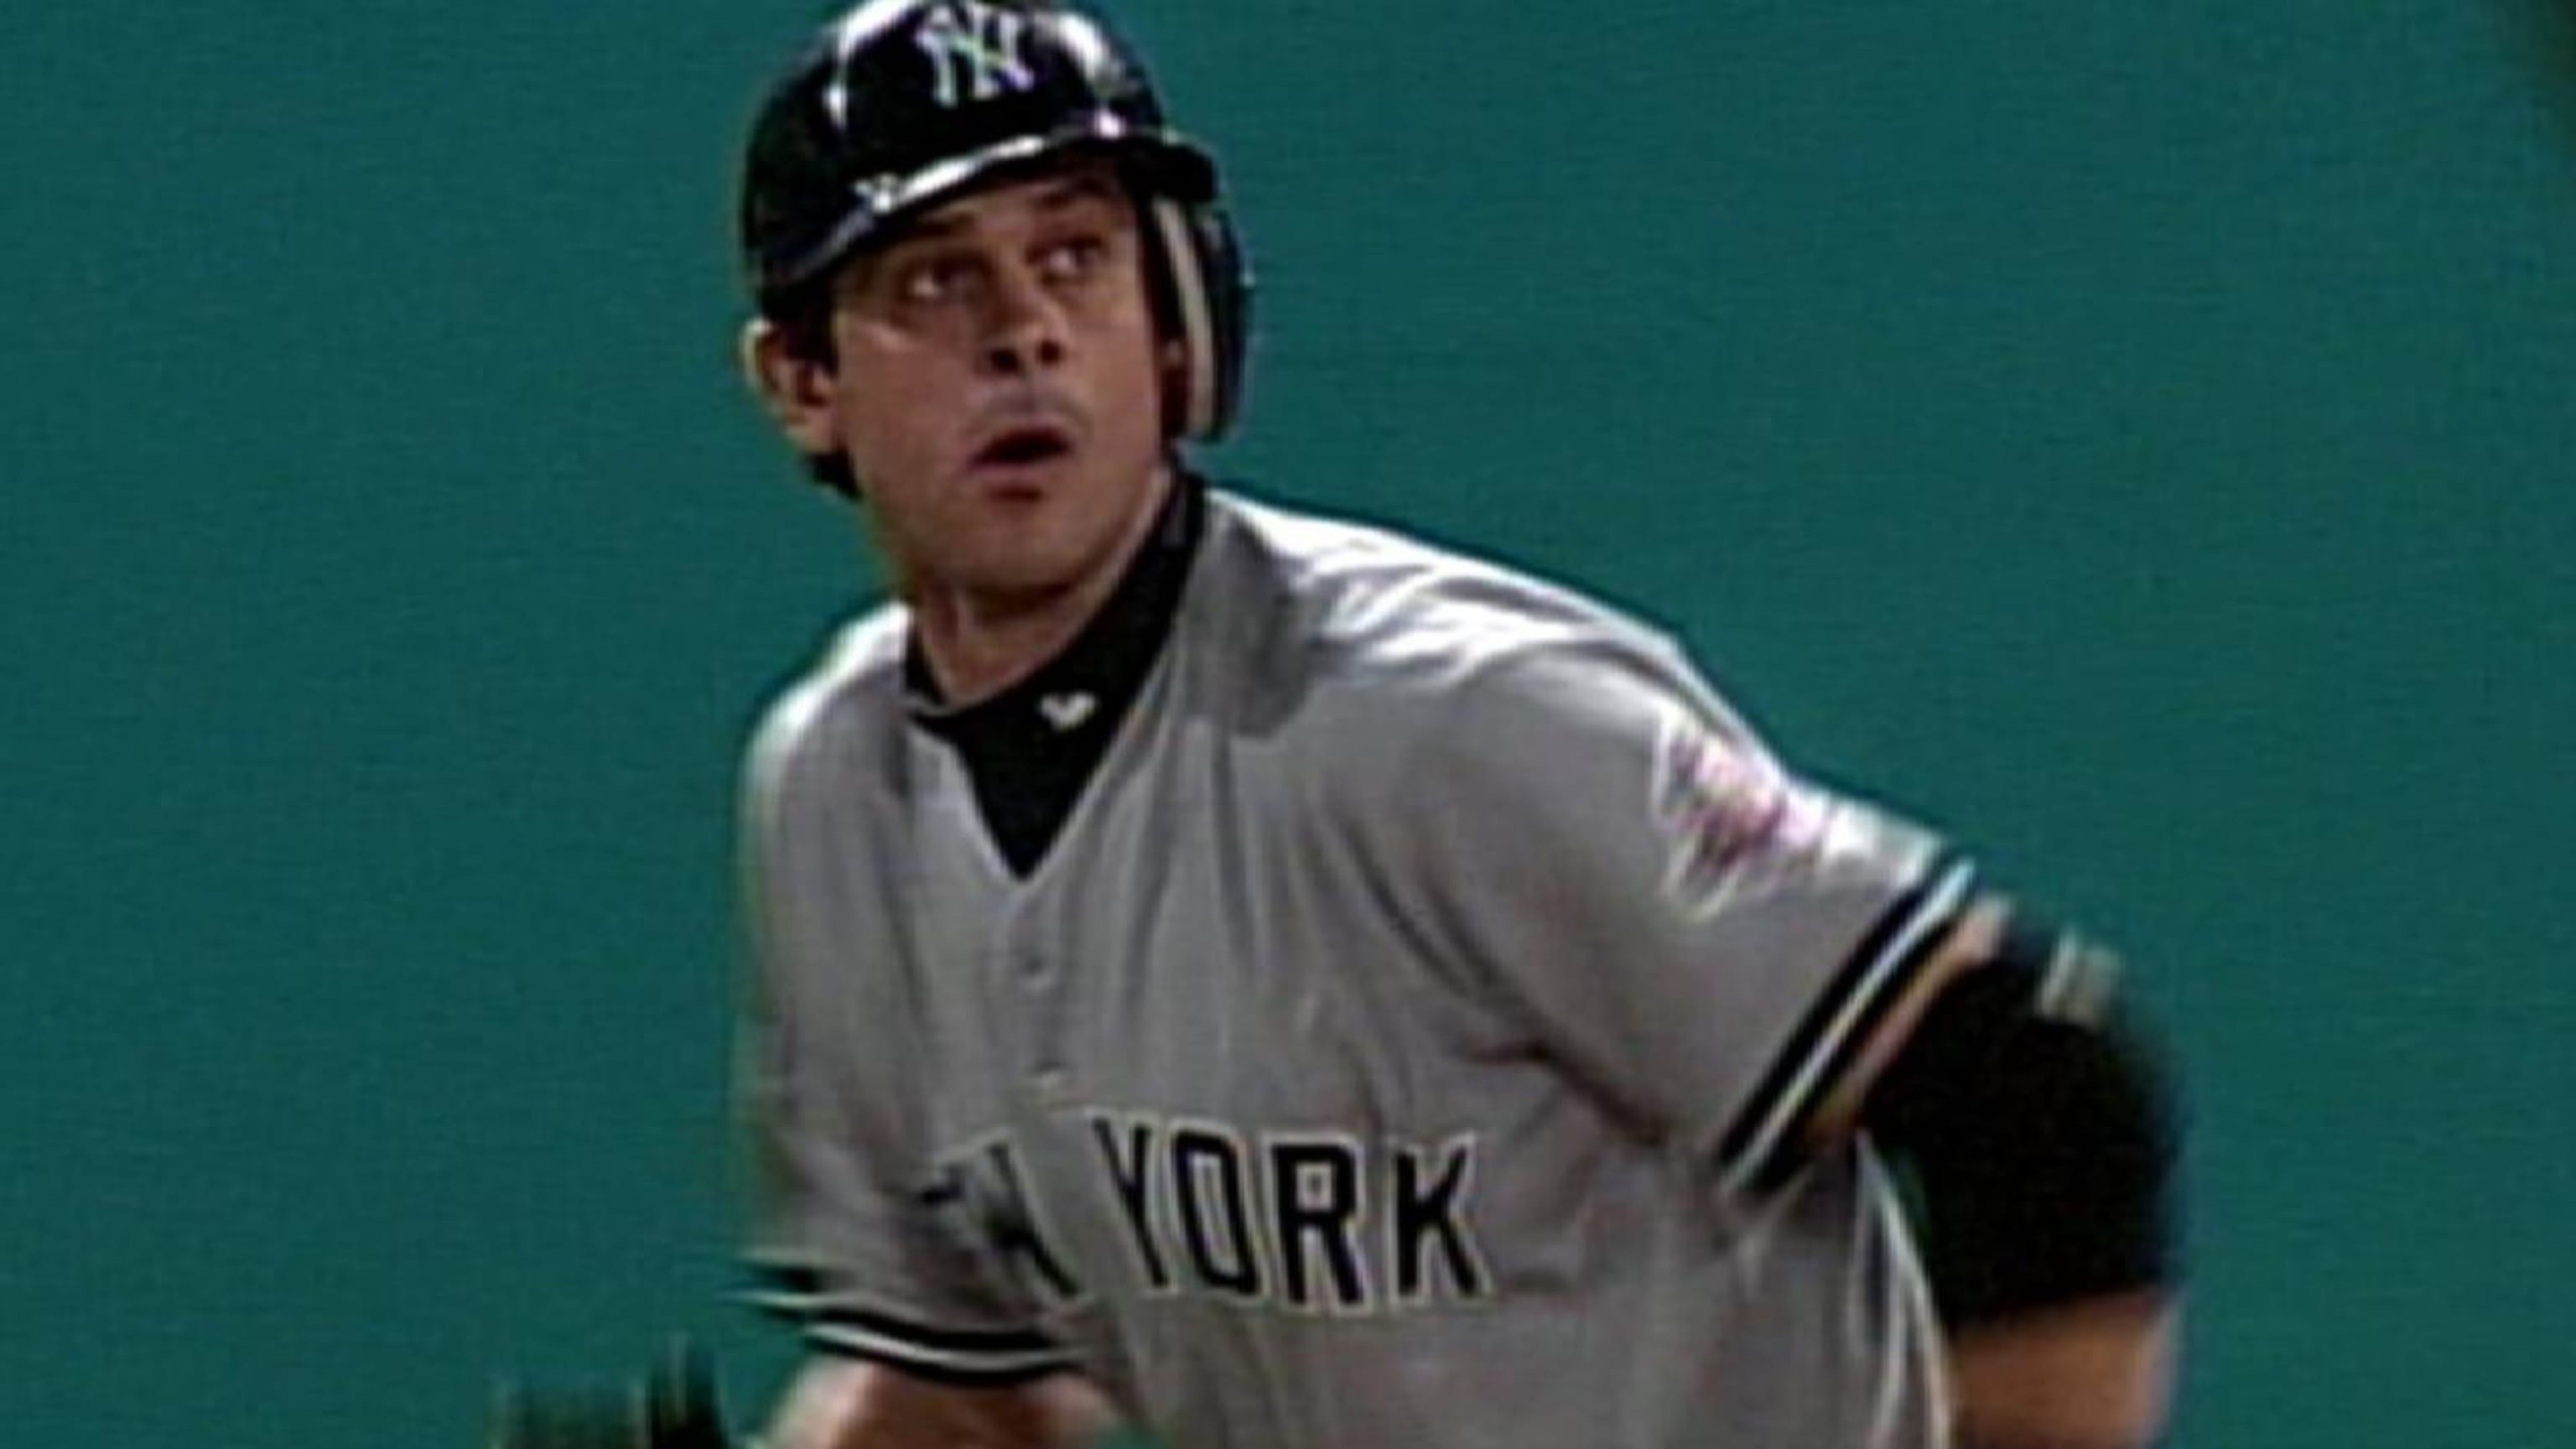 Aaron Boone is the new Yankees manager, so let's look back at his 2003  season